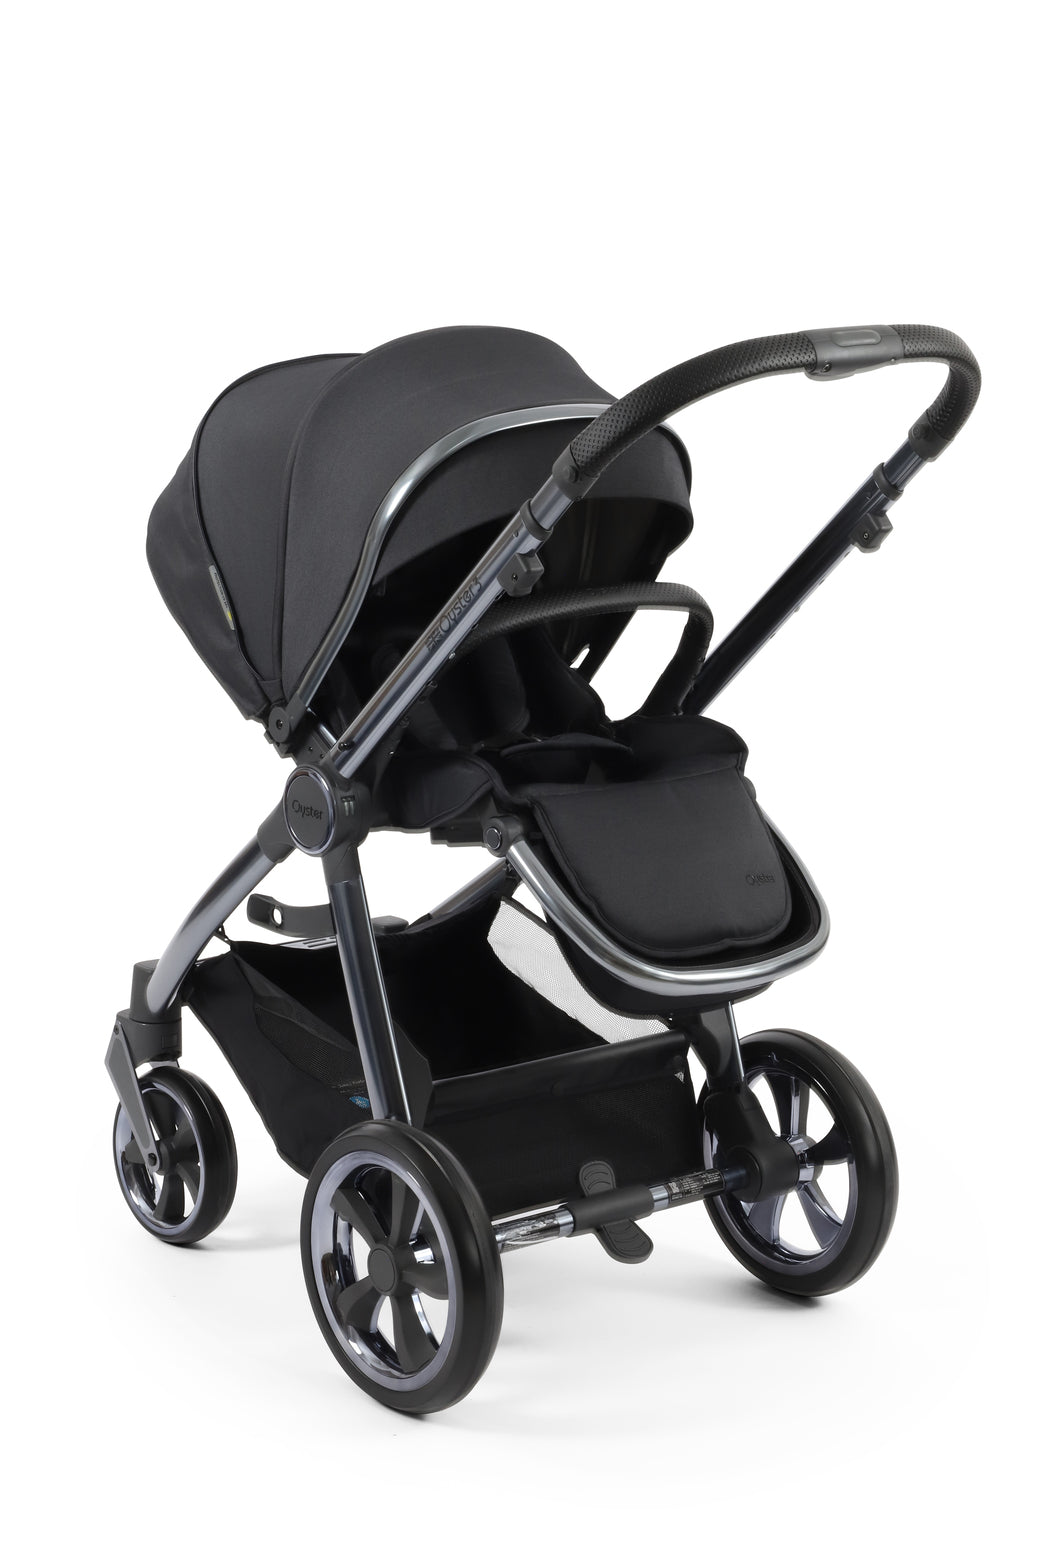 Babystyle Oyster 3 Pushchair - Carbonite - For Your Little One